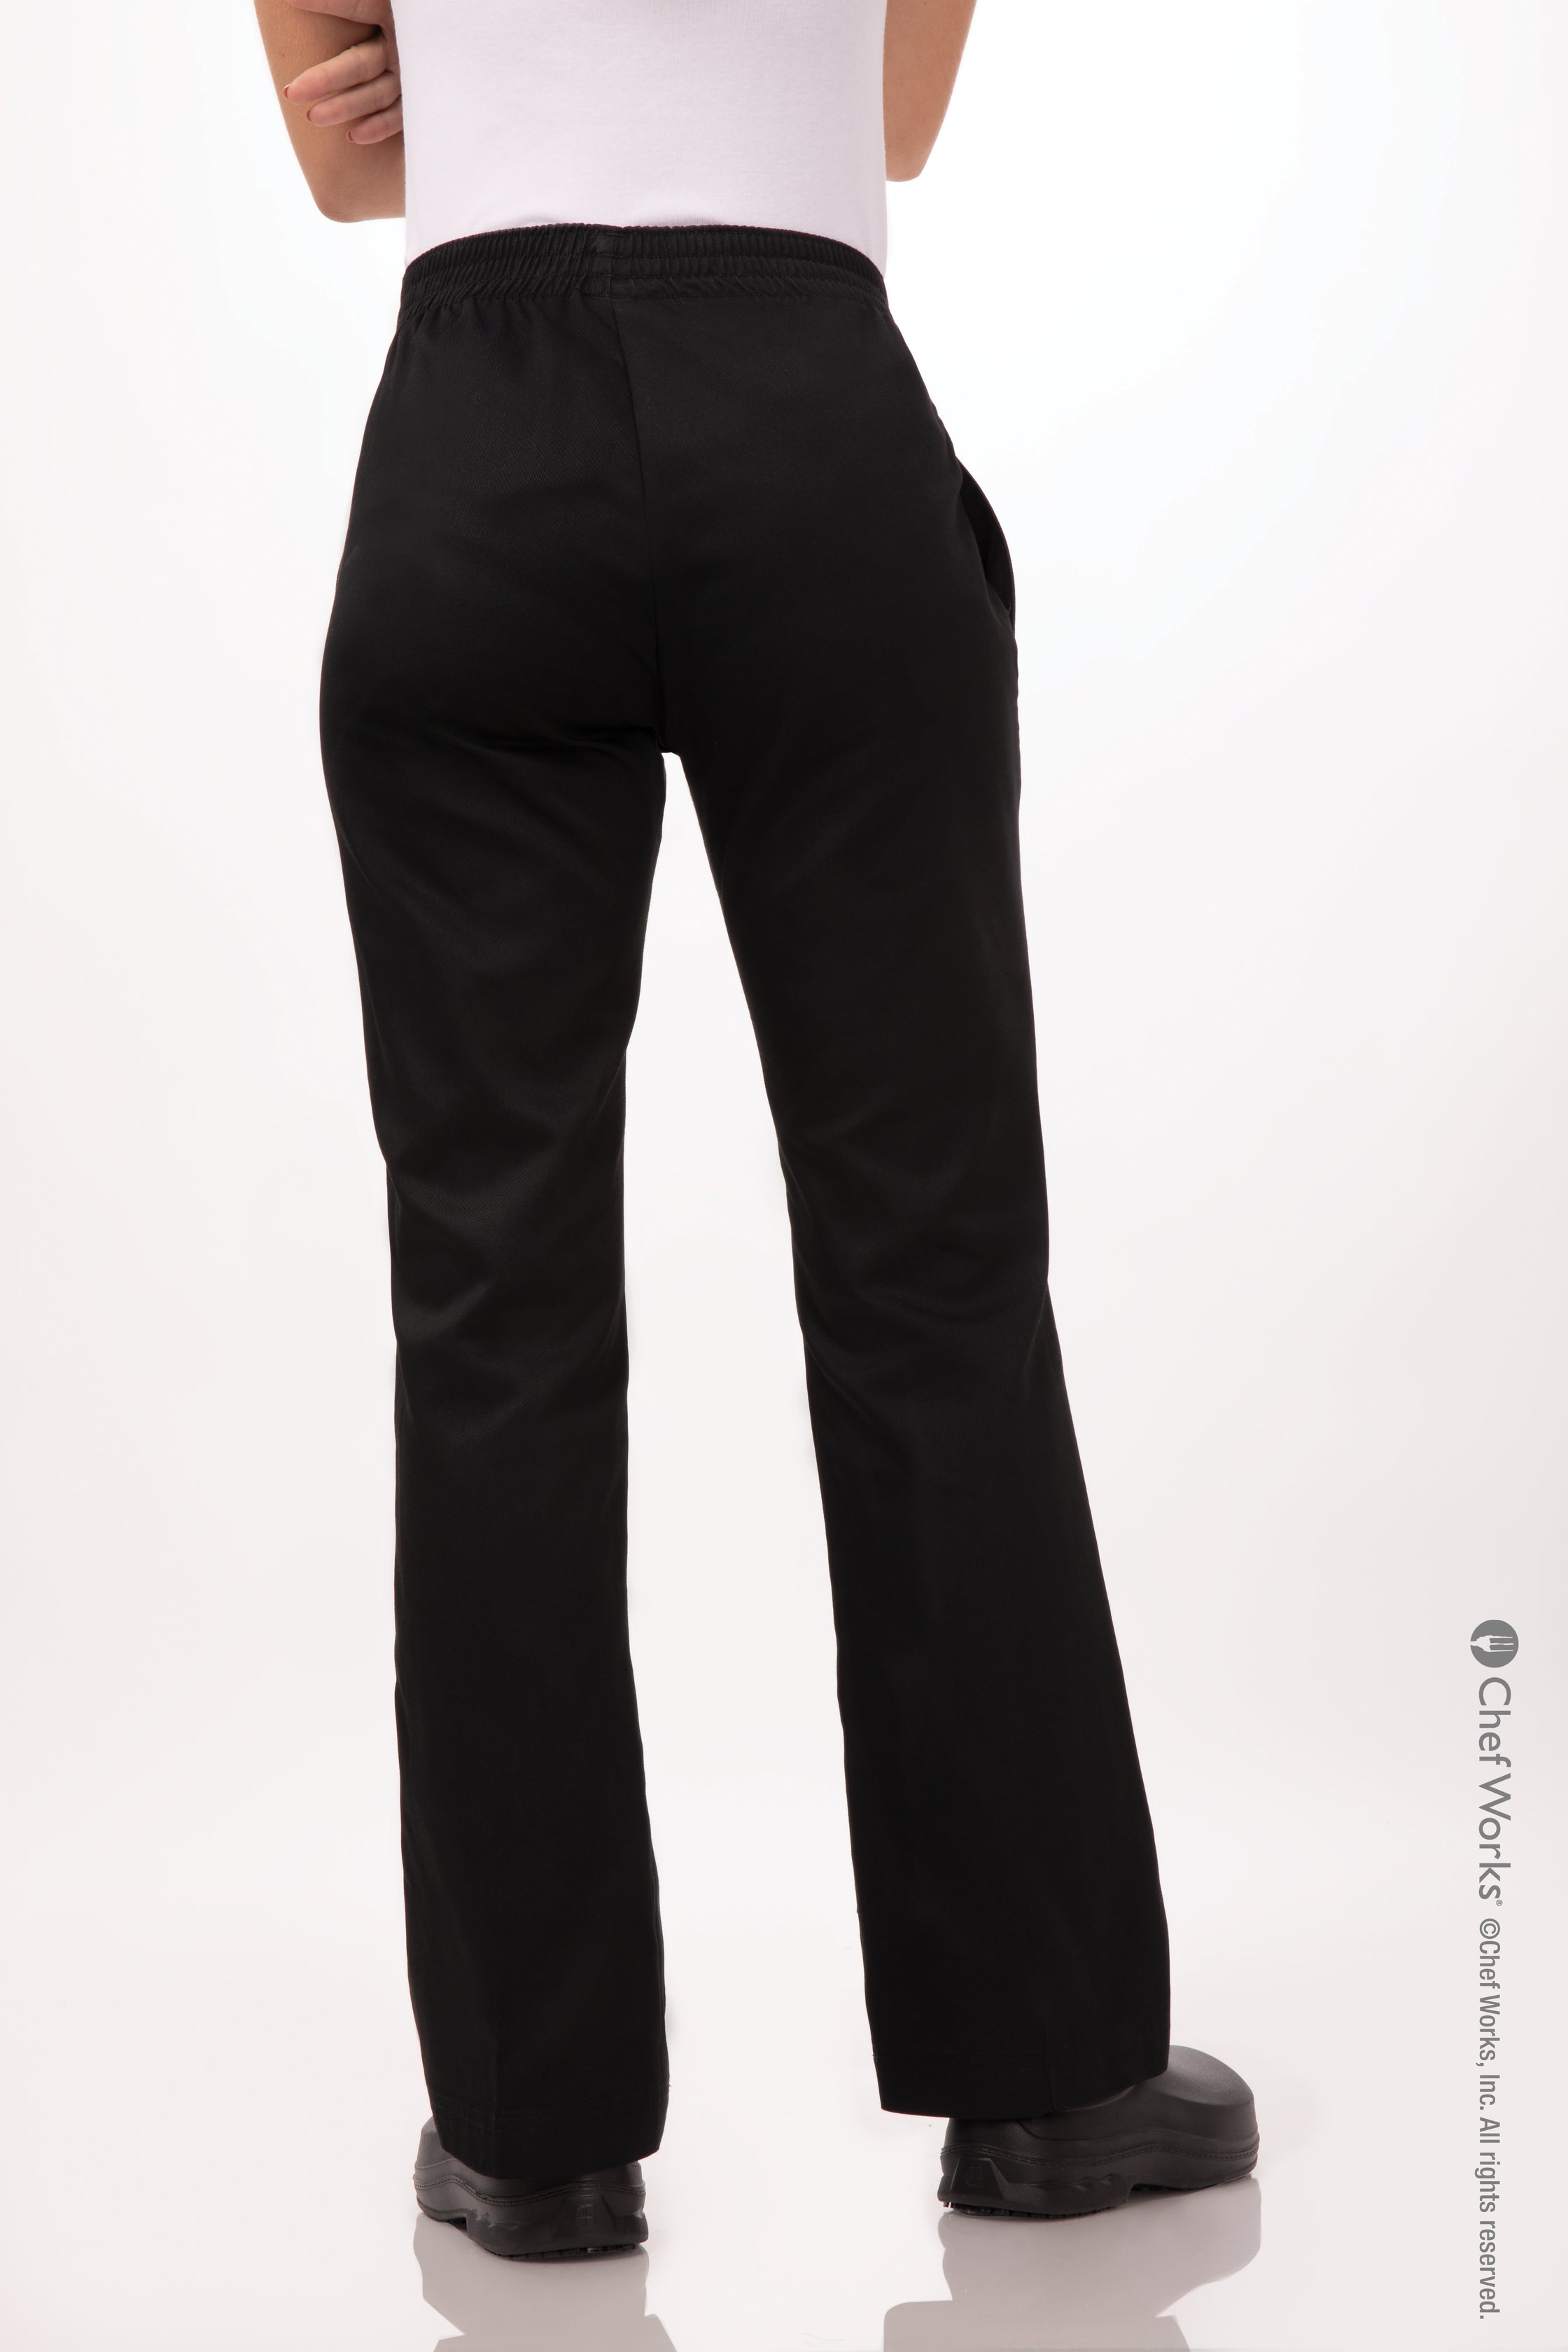 ESSENTIAL BAGGY CHEF PANTS WOMENS